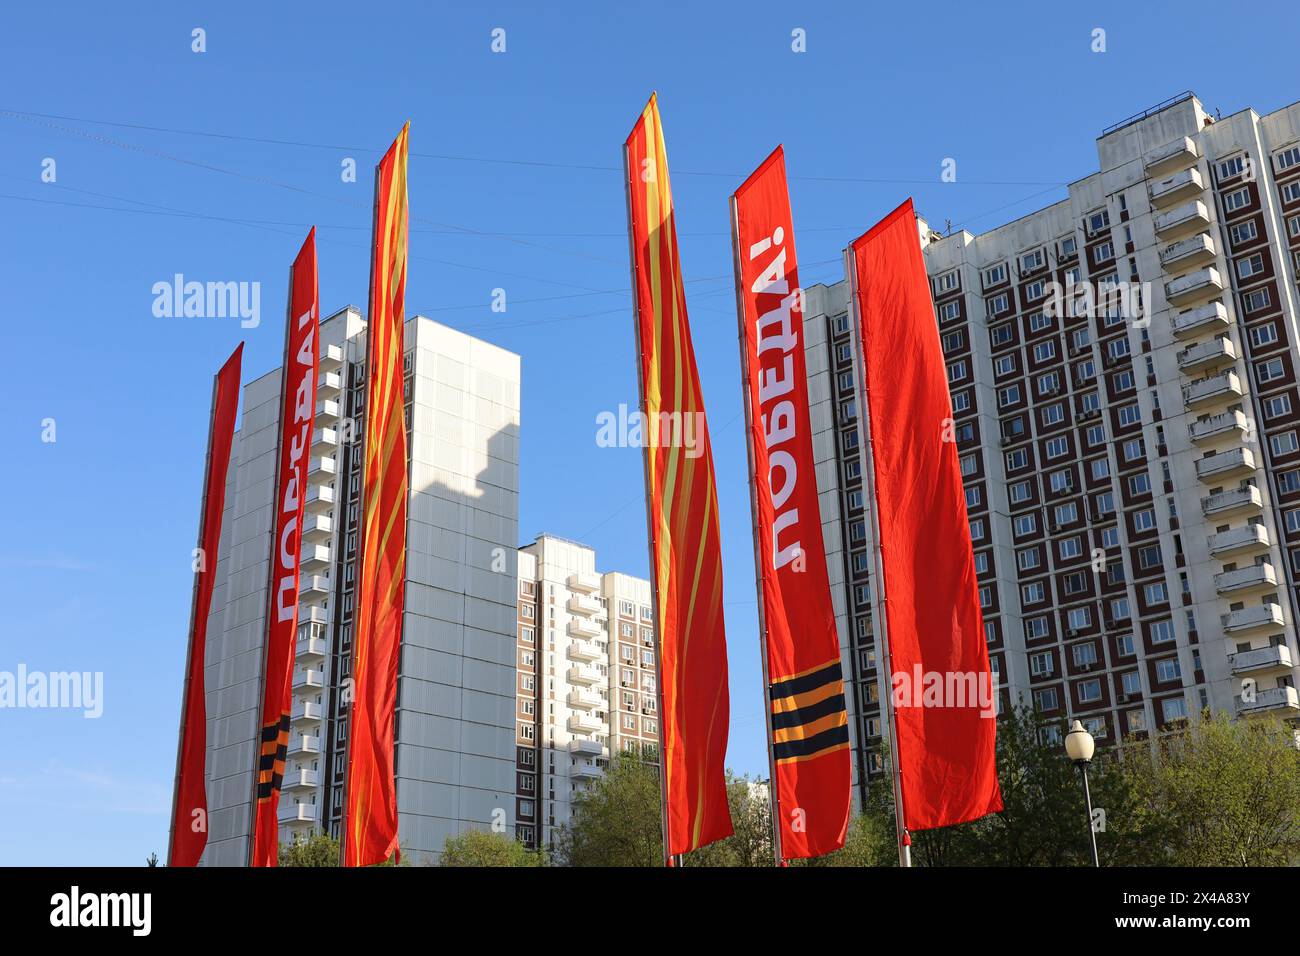 Red flags against the city buildings, Victory Day celebration in Russia Stock Photo